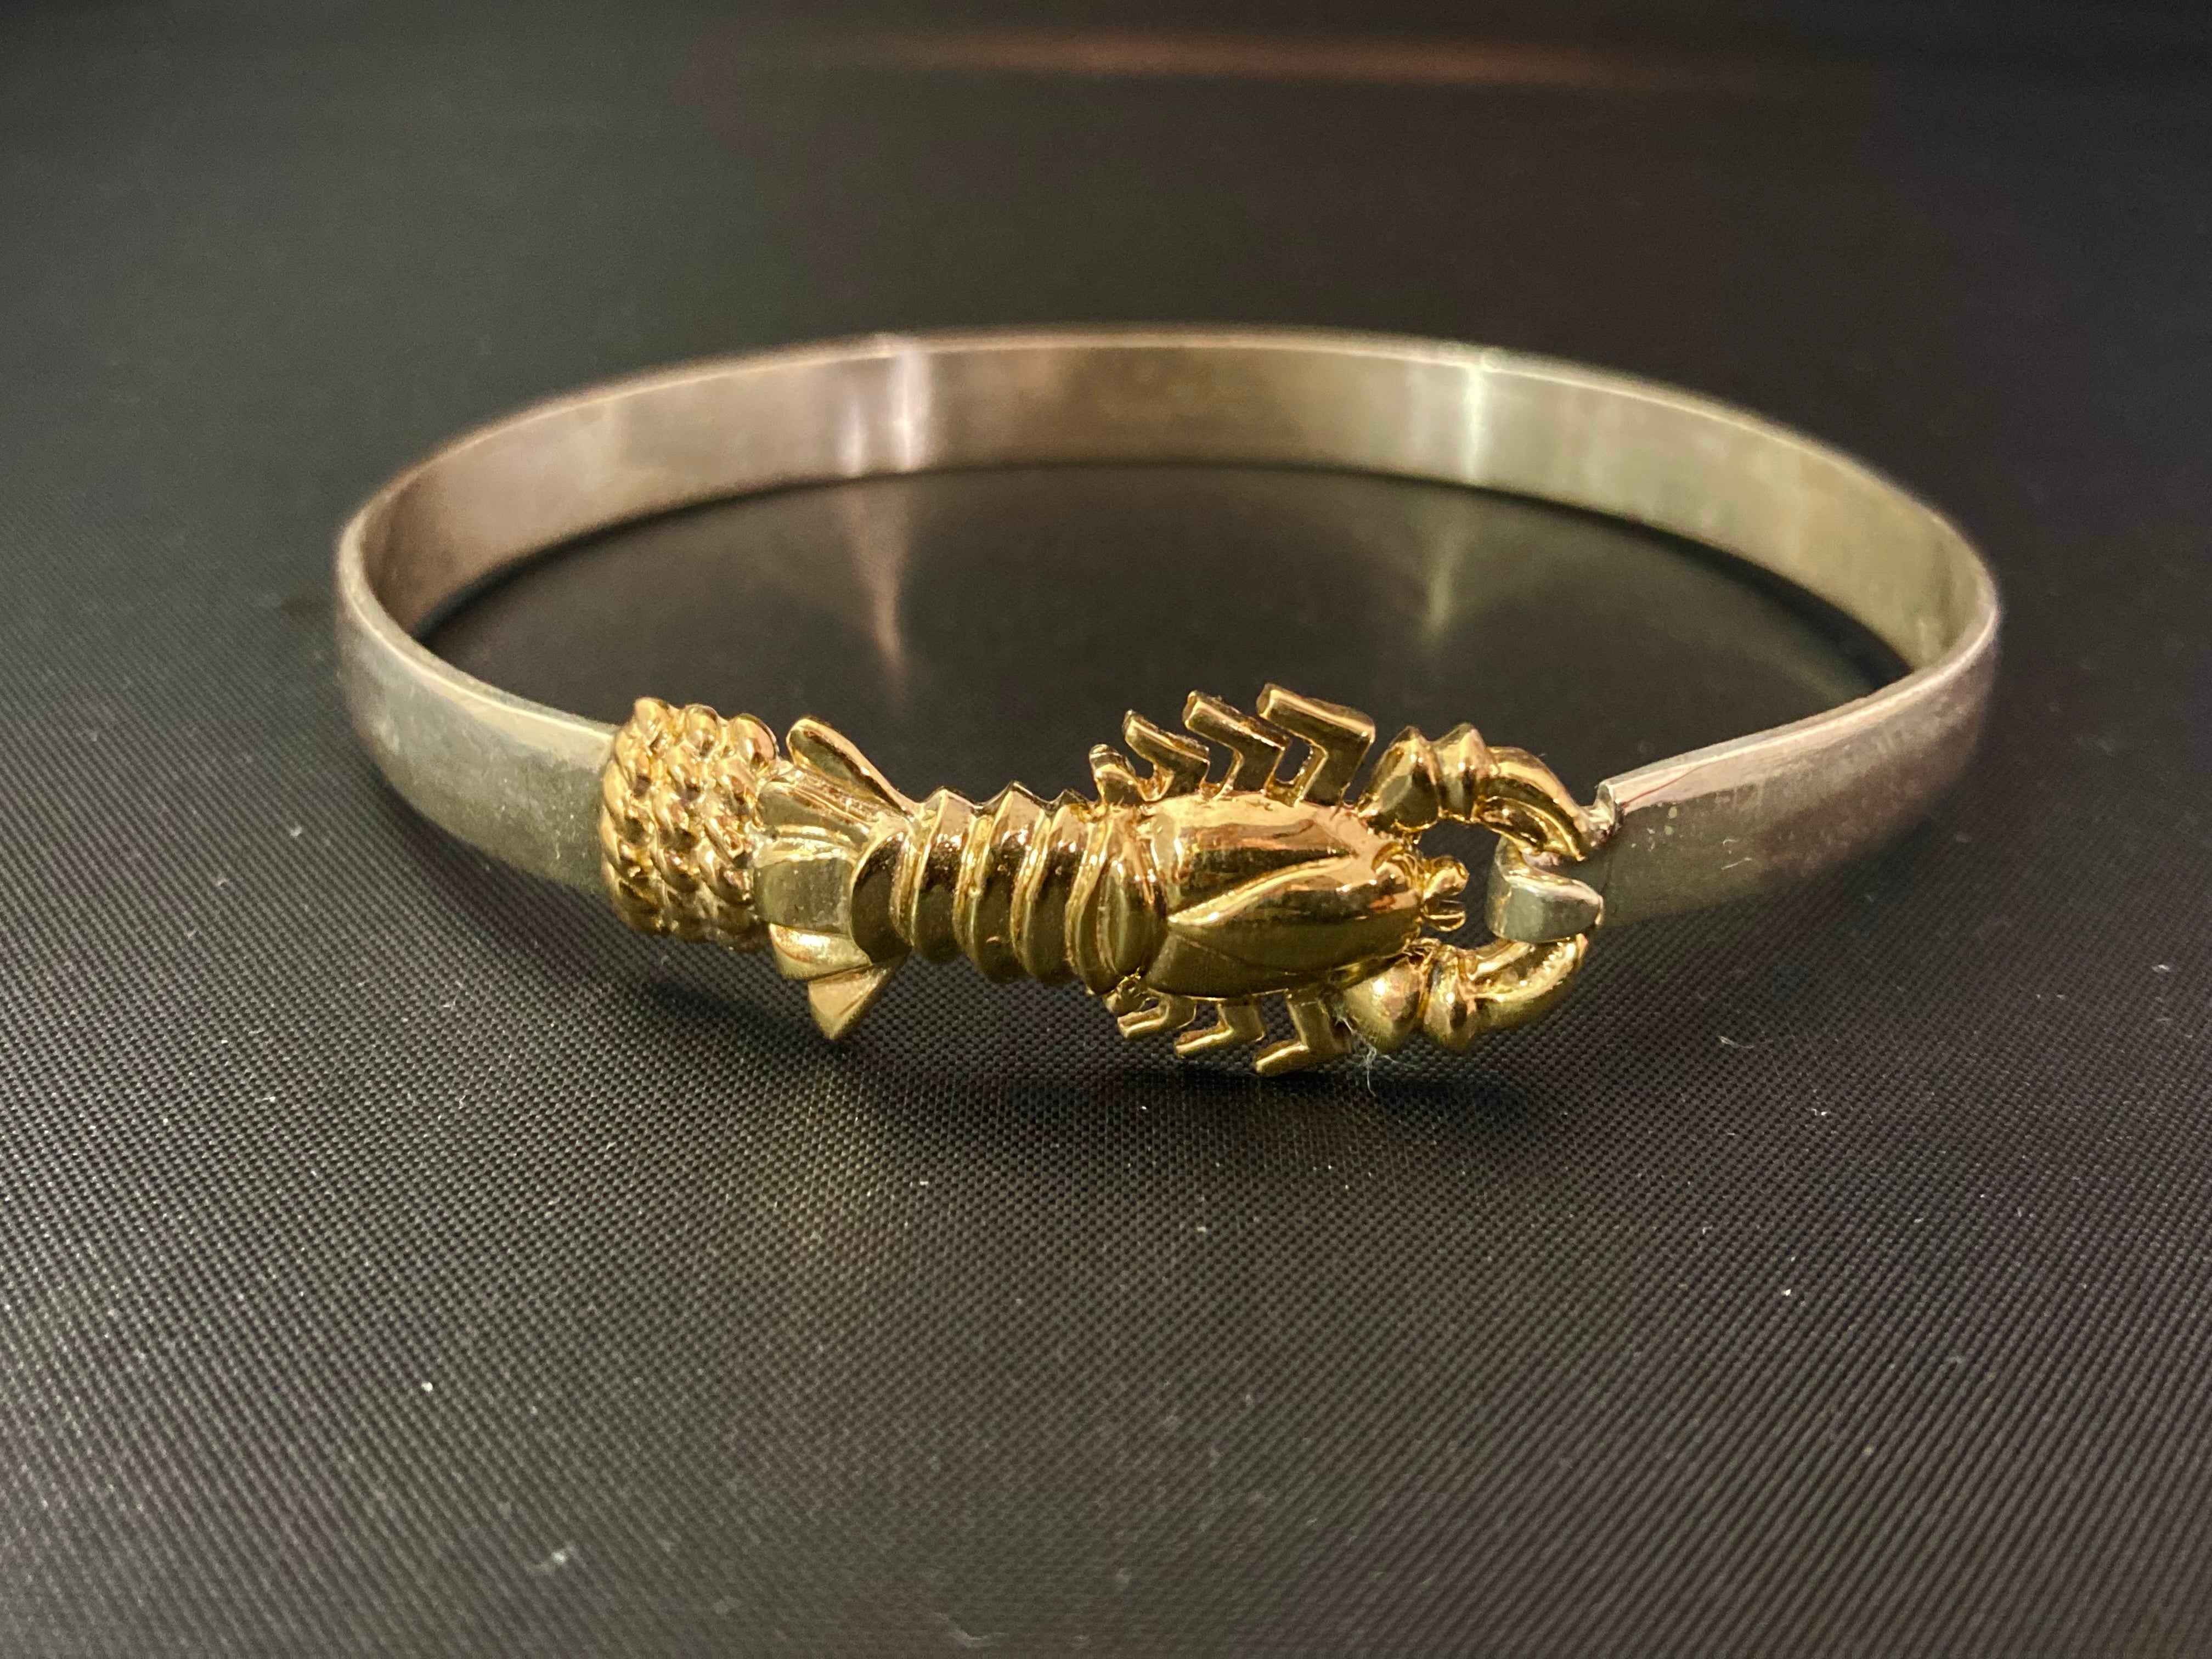 Lobster Claw Bracelet – thechristyfcollection